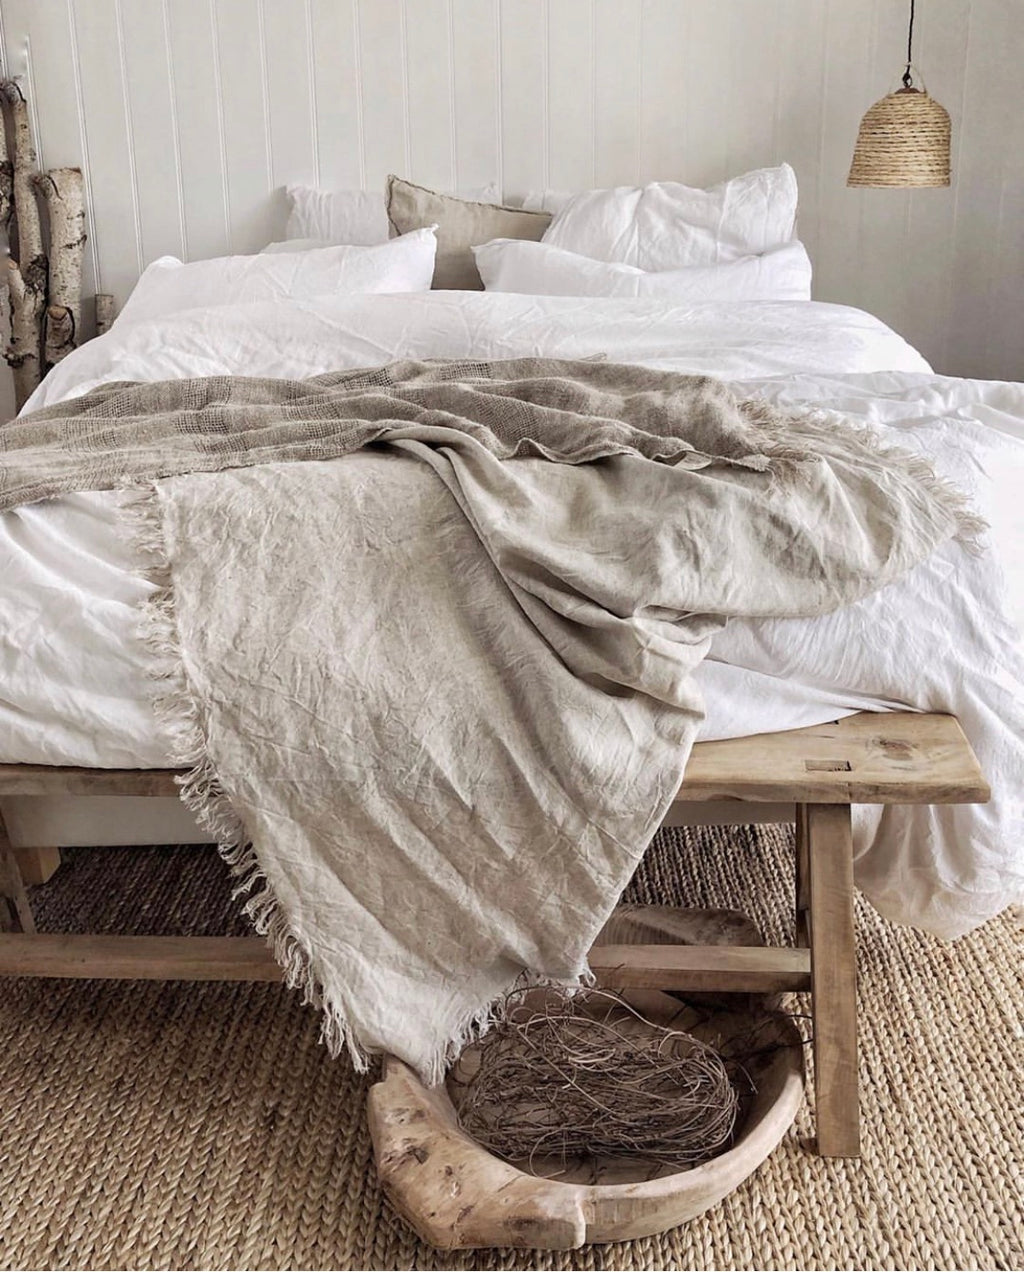 LINEN FRINGED THROW BLANKET - FLAX / NATURAL . Made from 100% linen & hand-finished with a soft, fringed border for a relaxed look & feel. The extra-long design drapes generously over either side of your bed, creating a cozy, layered look. Available in Queen & King size.